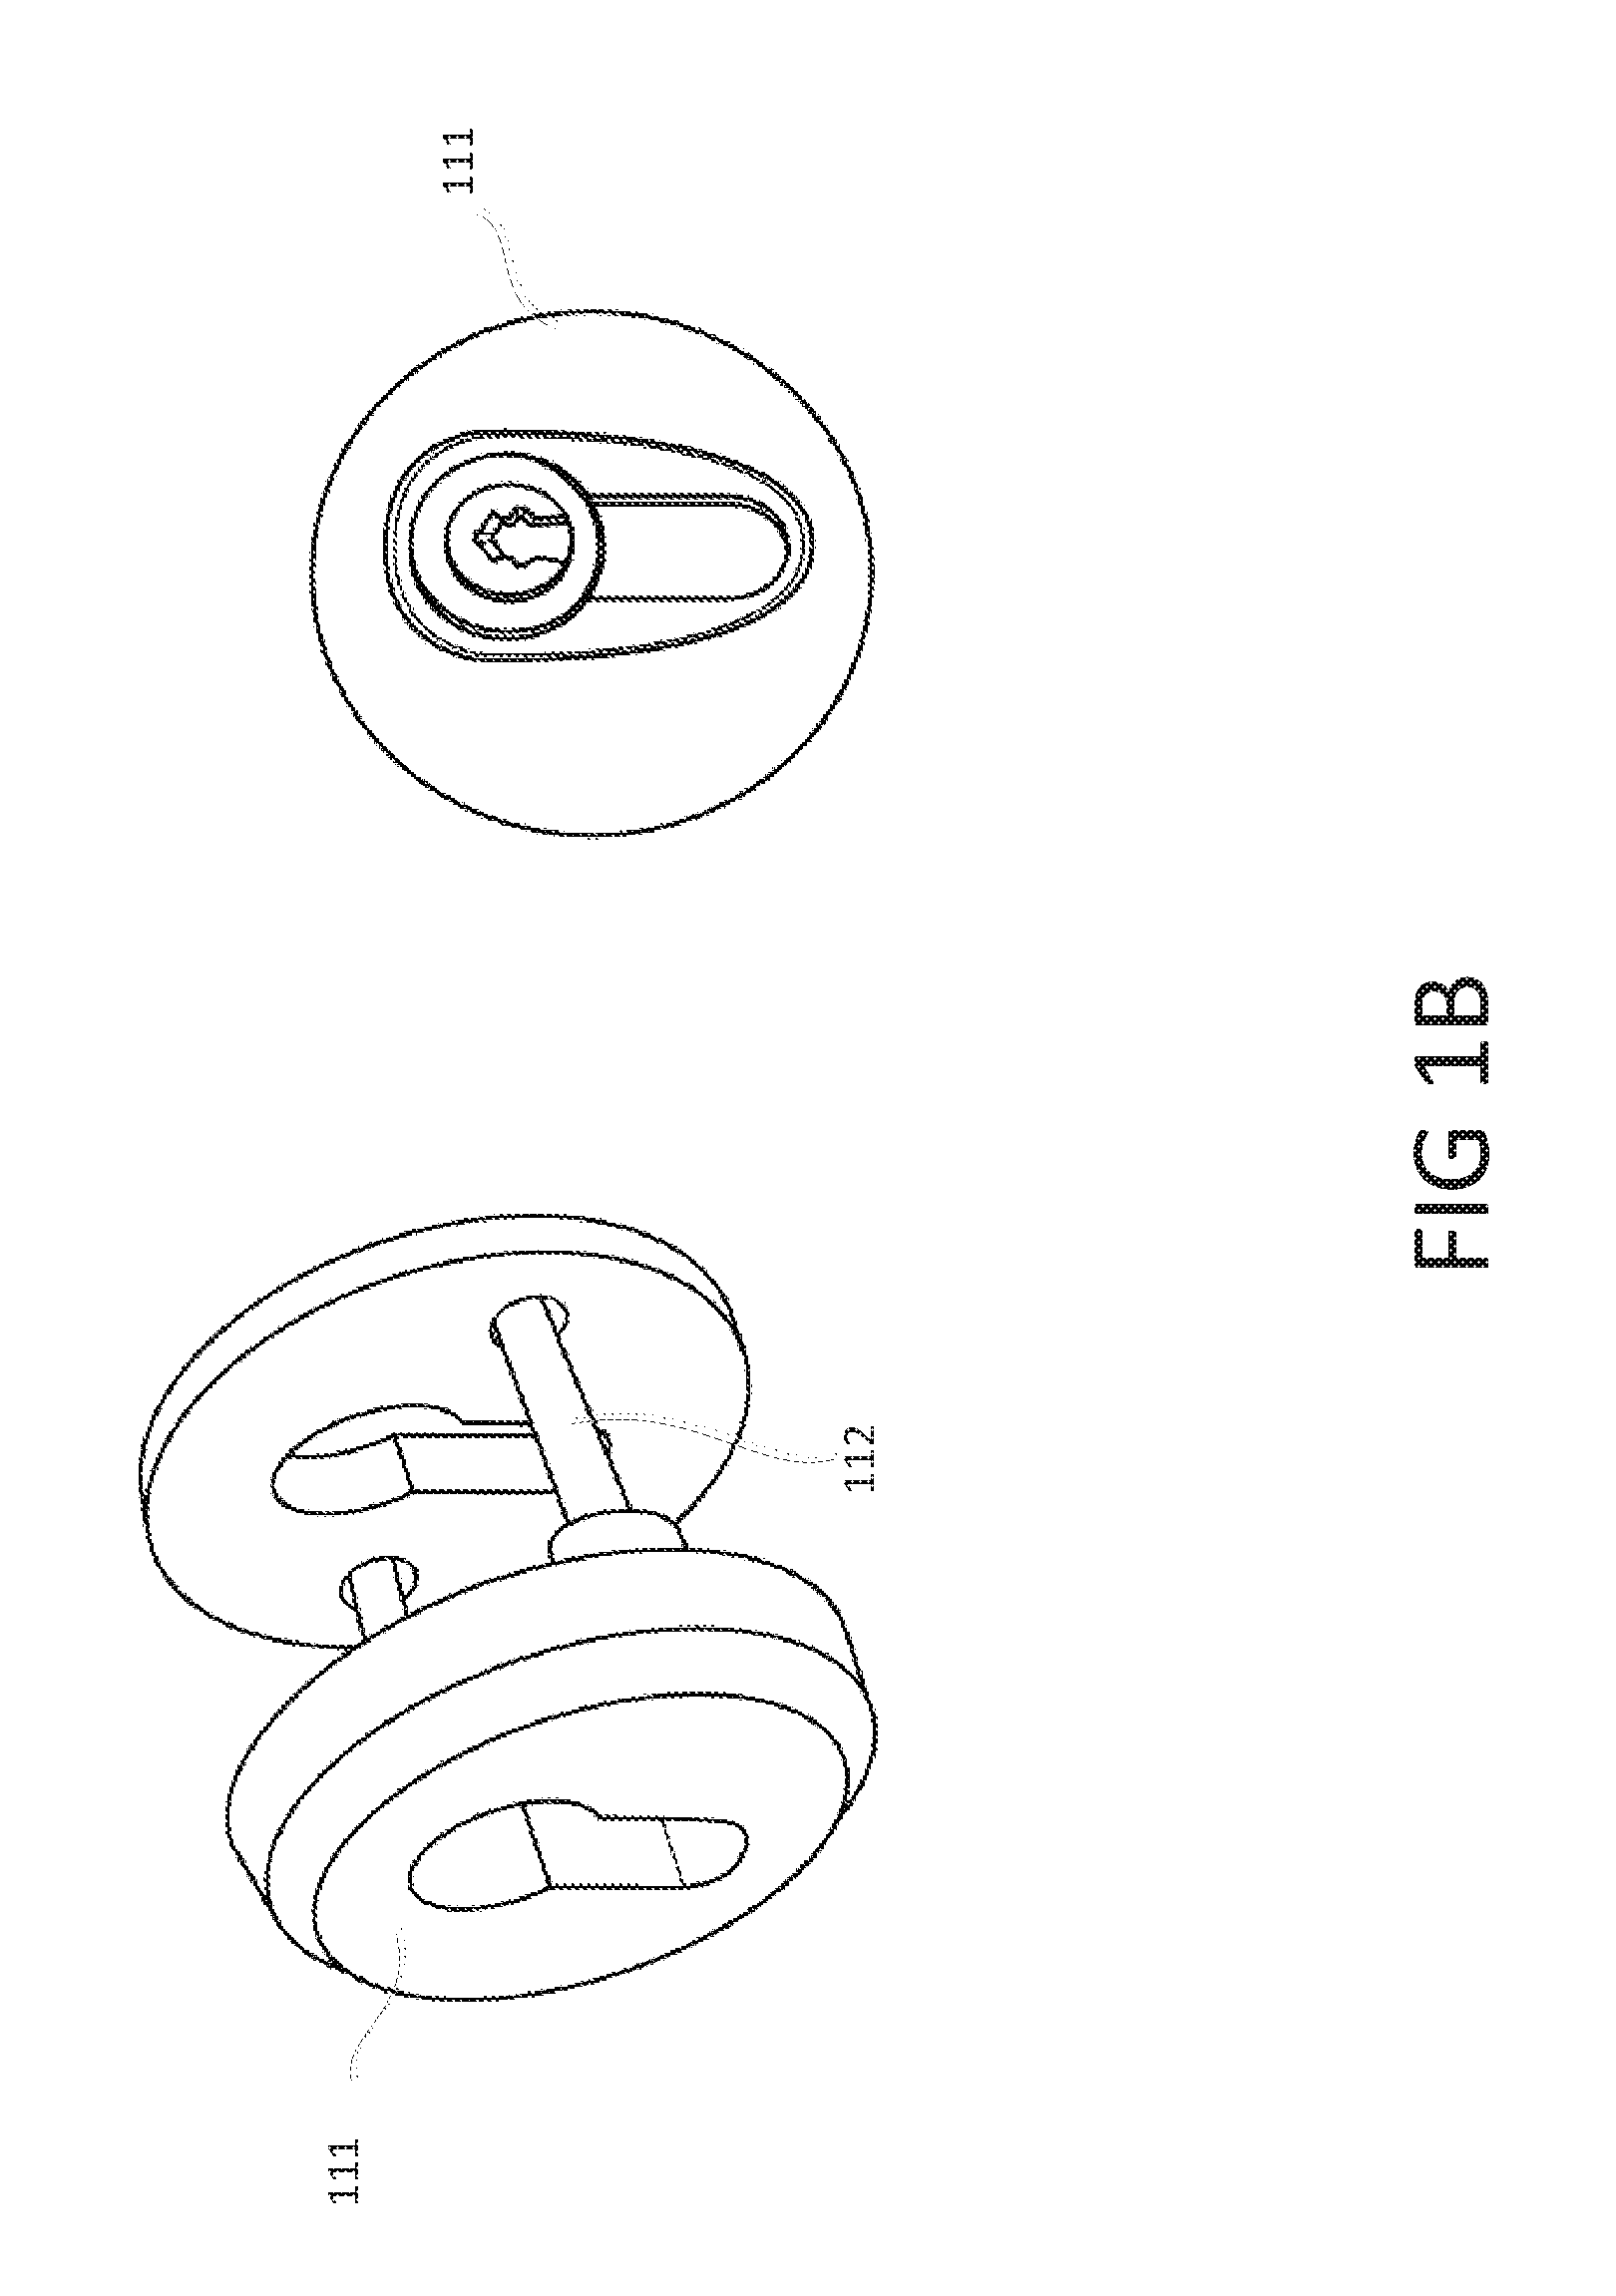 Systems and methods for secure lock systems with redundant access control